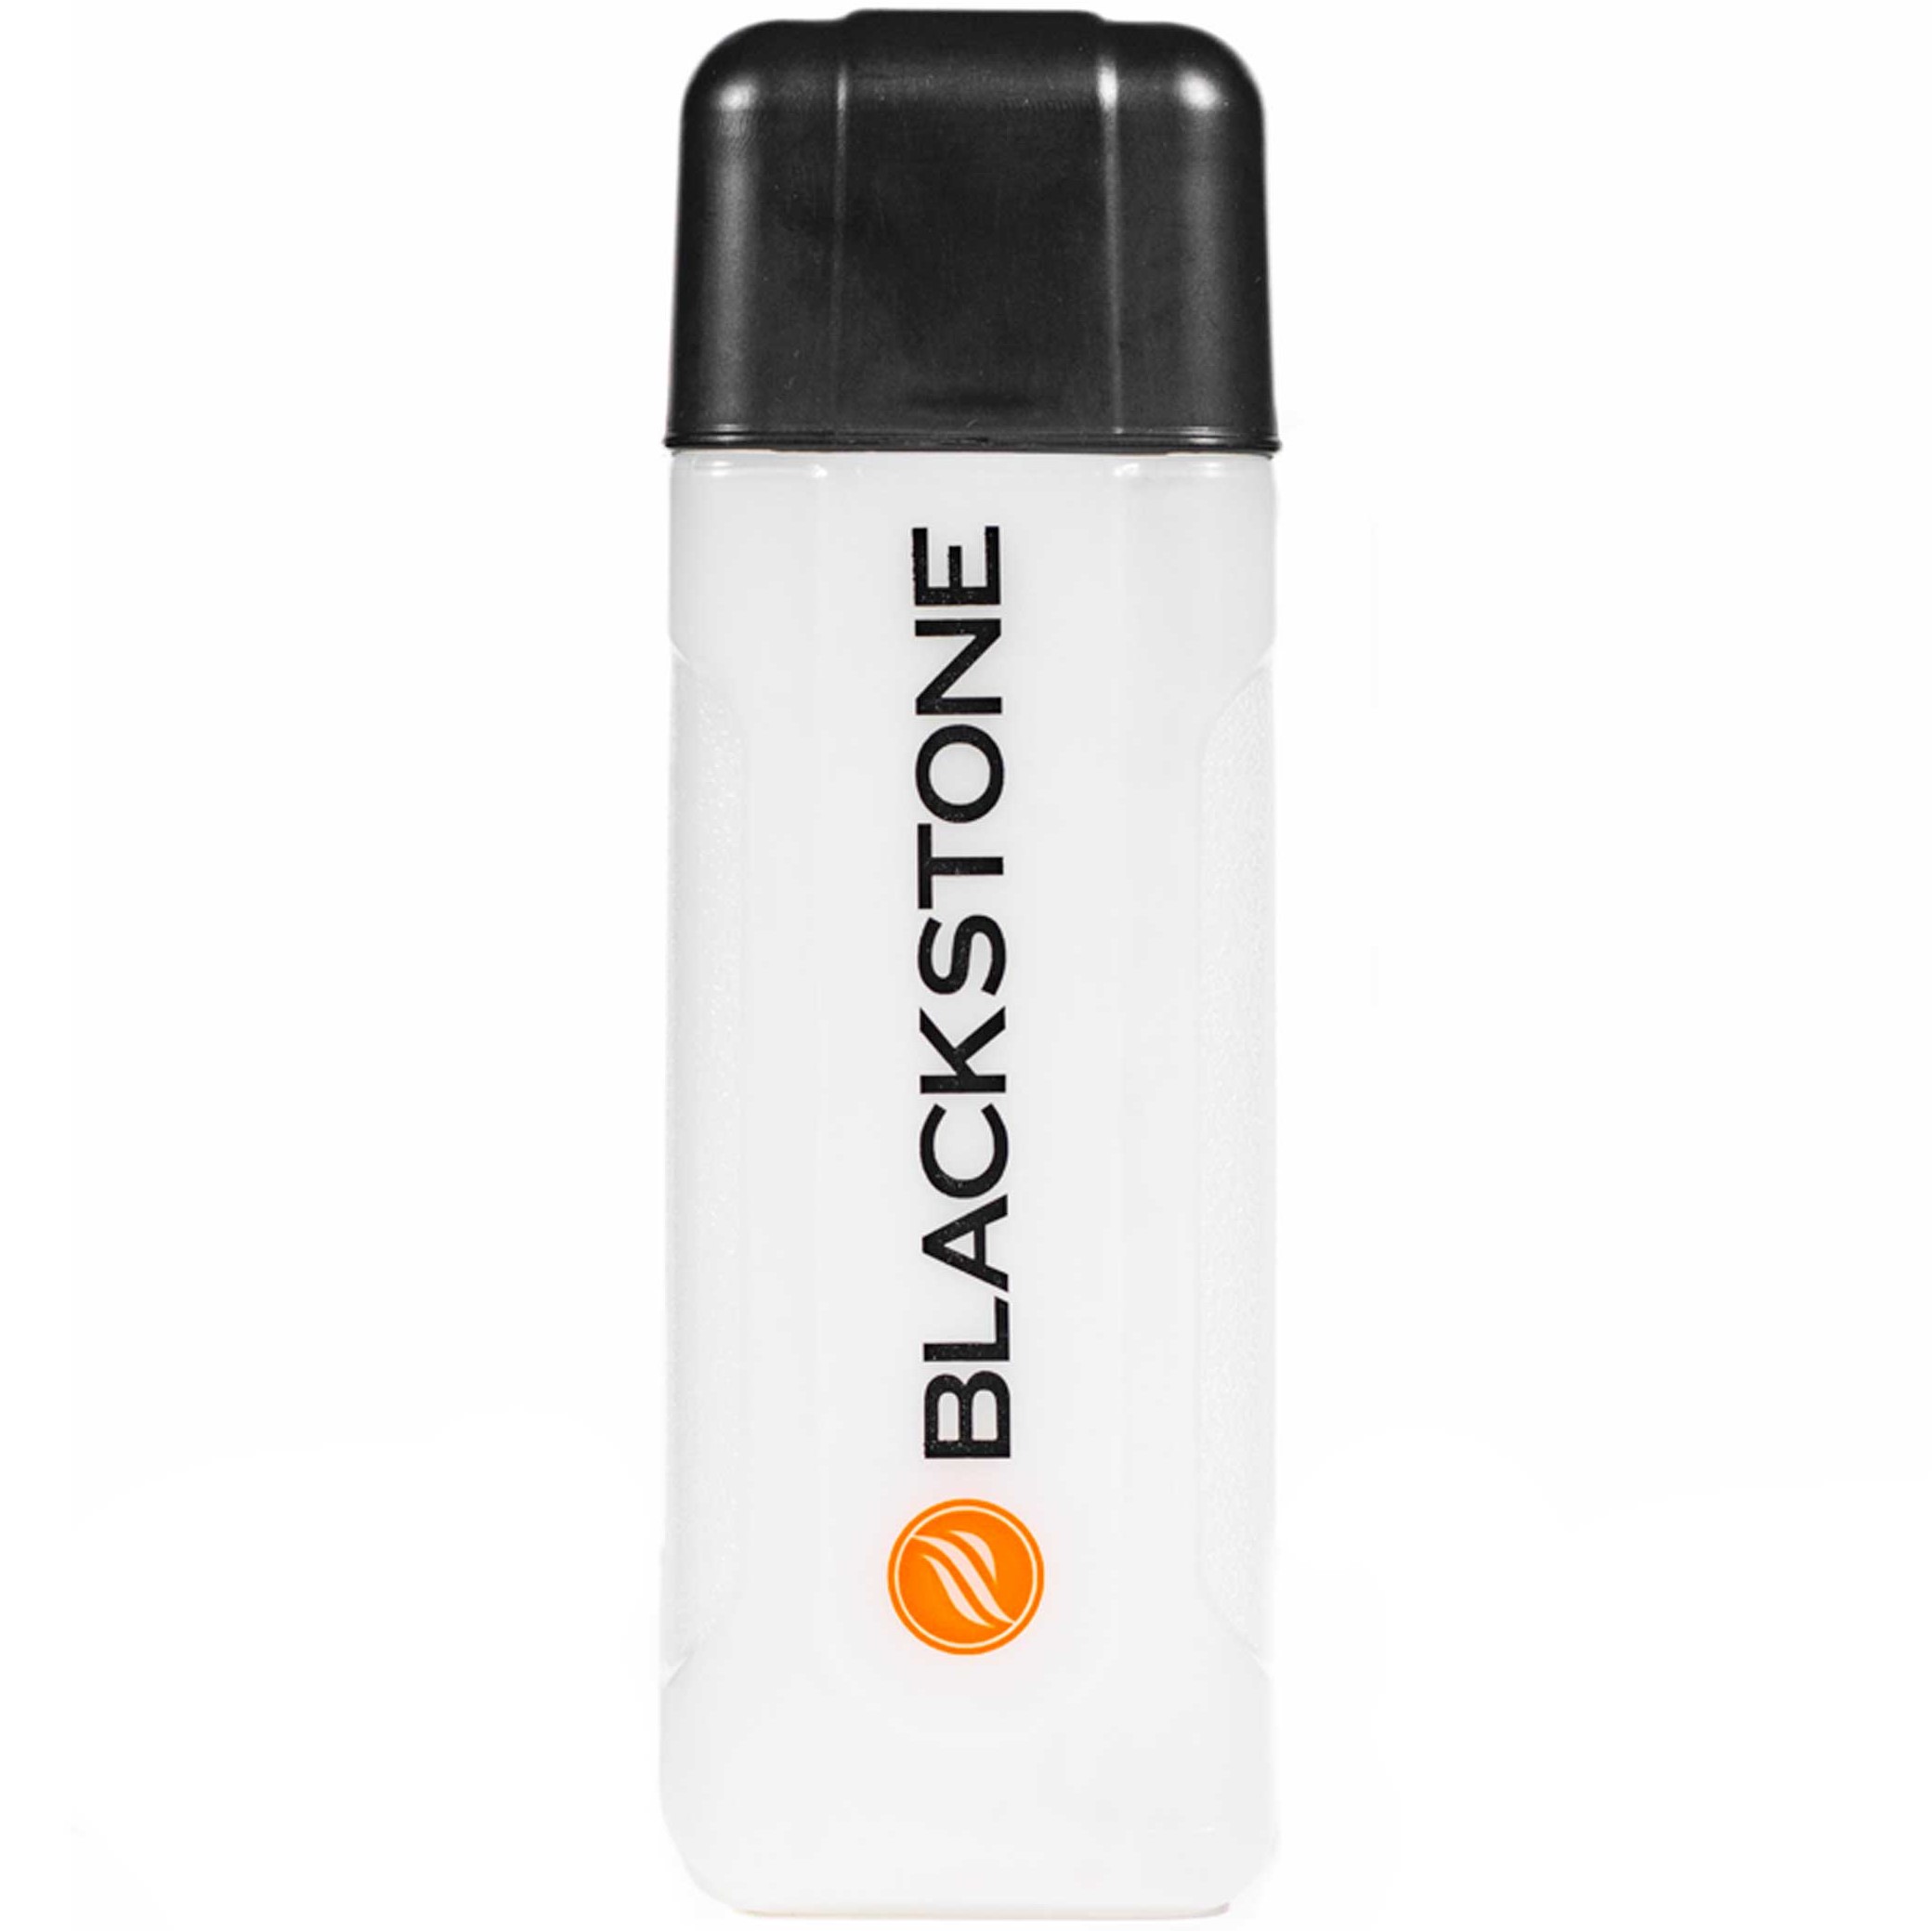 Blackstone 32 oz Square Squeezable Bottle with Lid, Perfect for Oil & Water - image 1 of 7